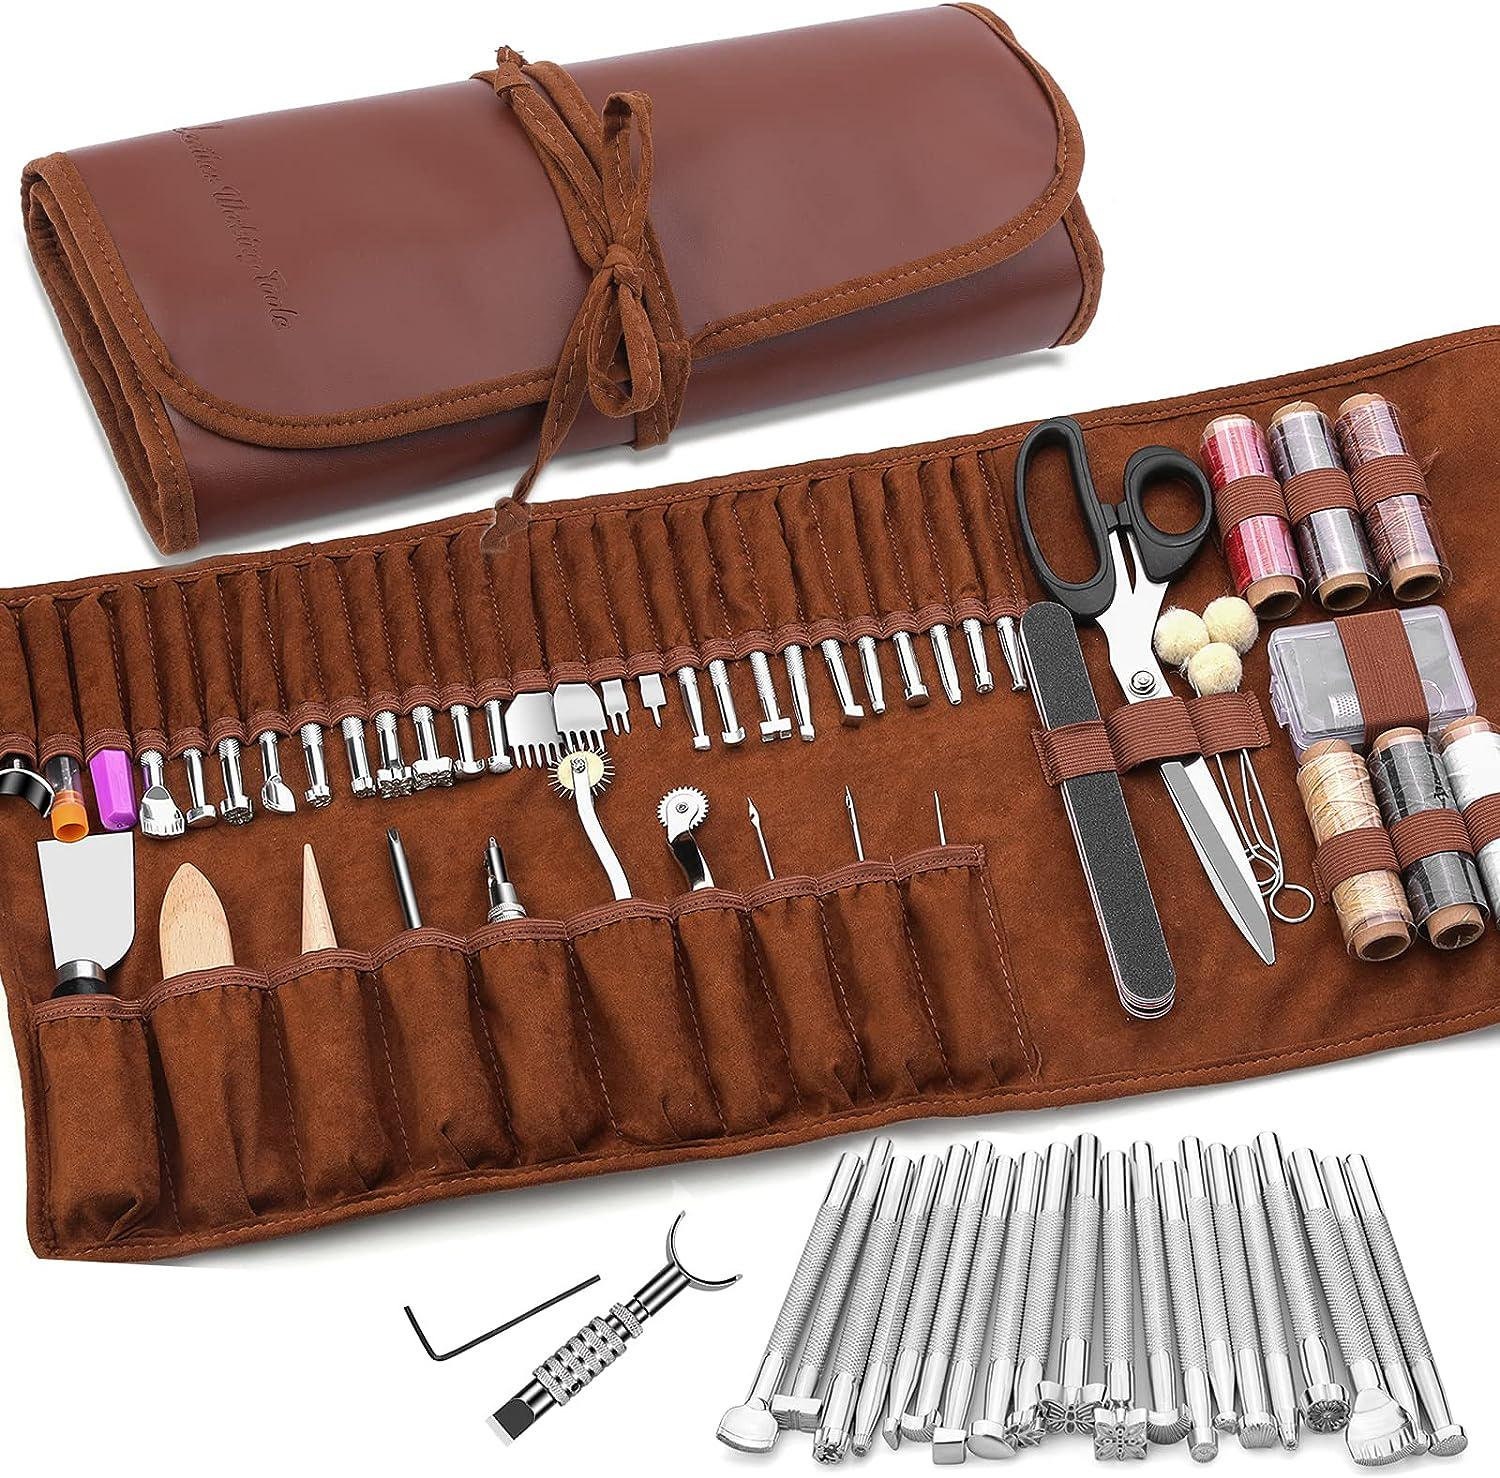 Leather Sewing Kit, Upholstery Repair Sewing Kit Leather Stitching